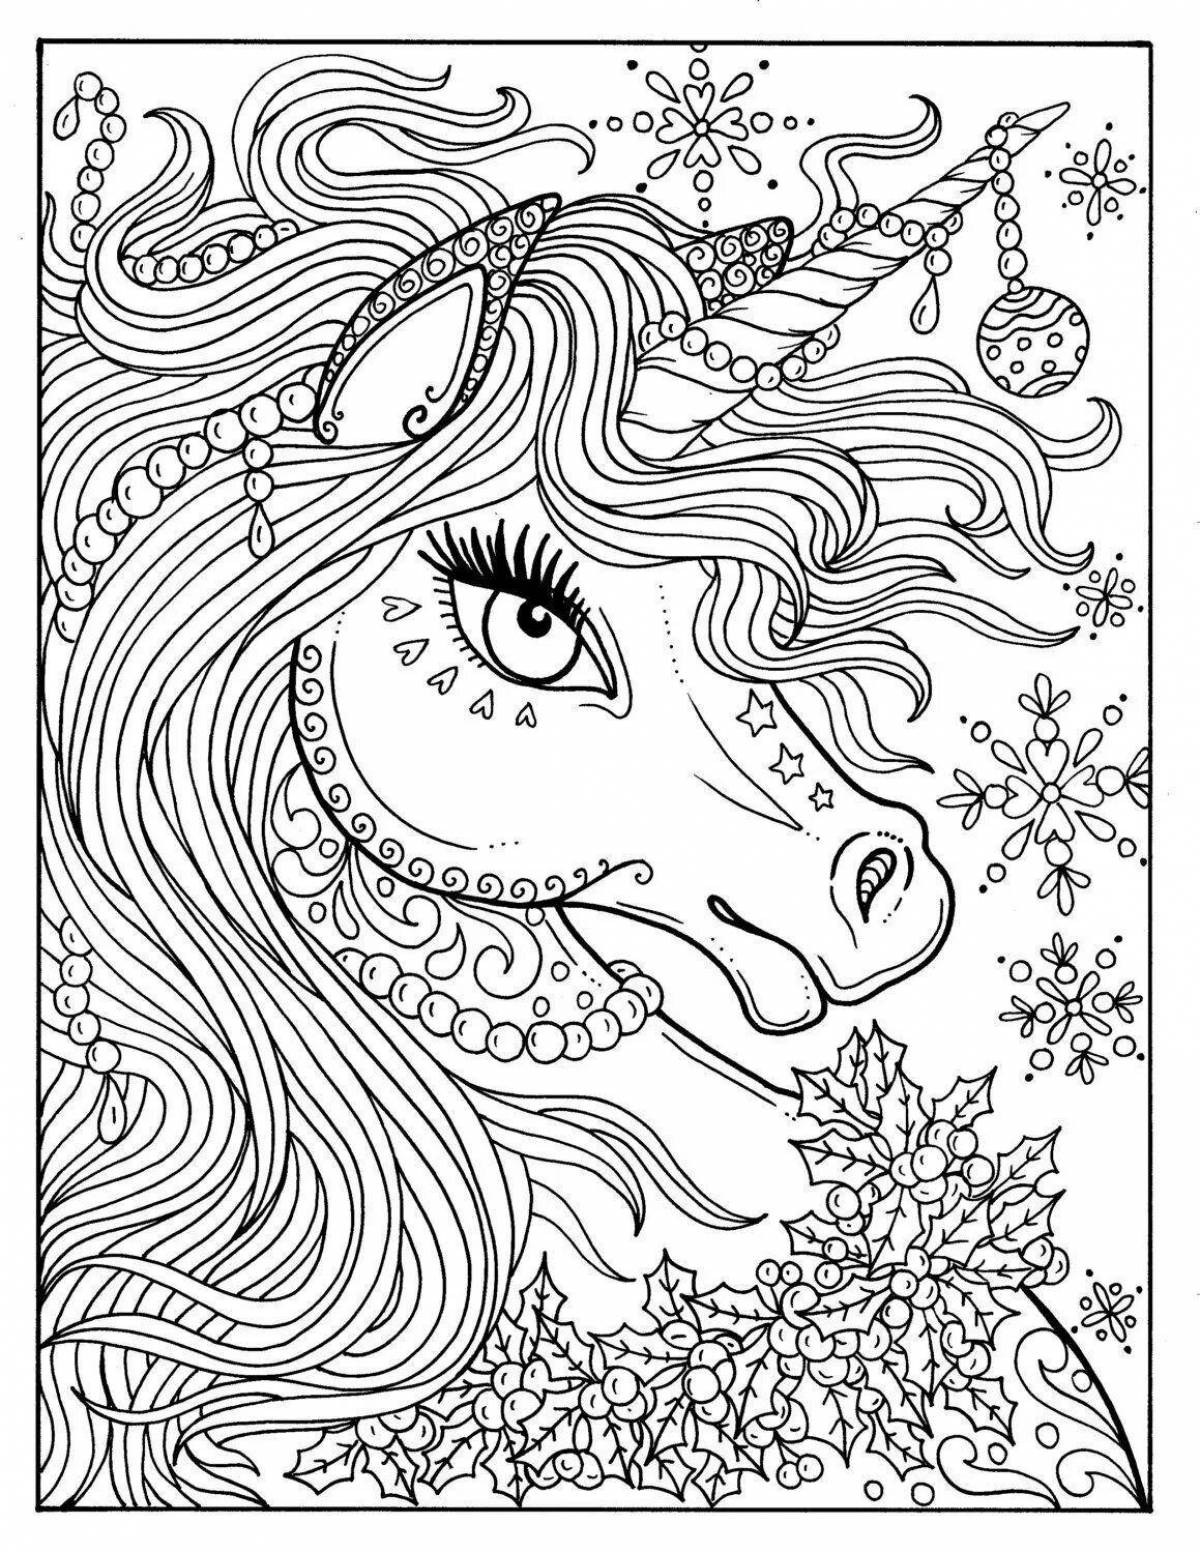 A fascinating coloring book for 11 years old for girls